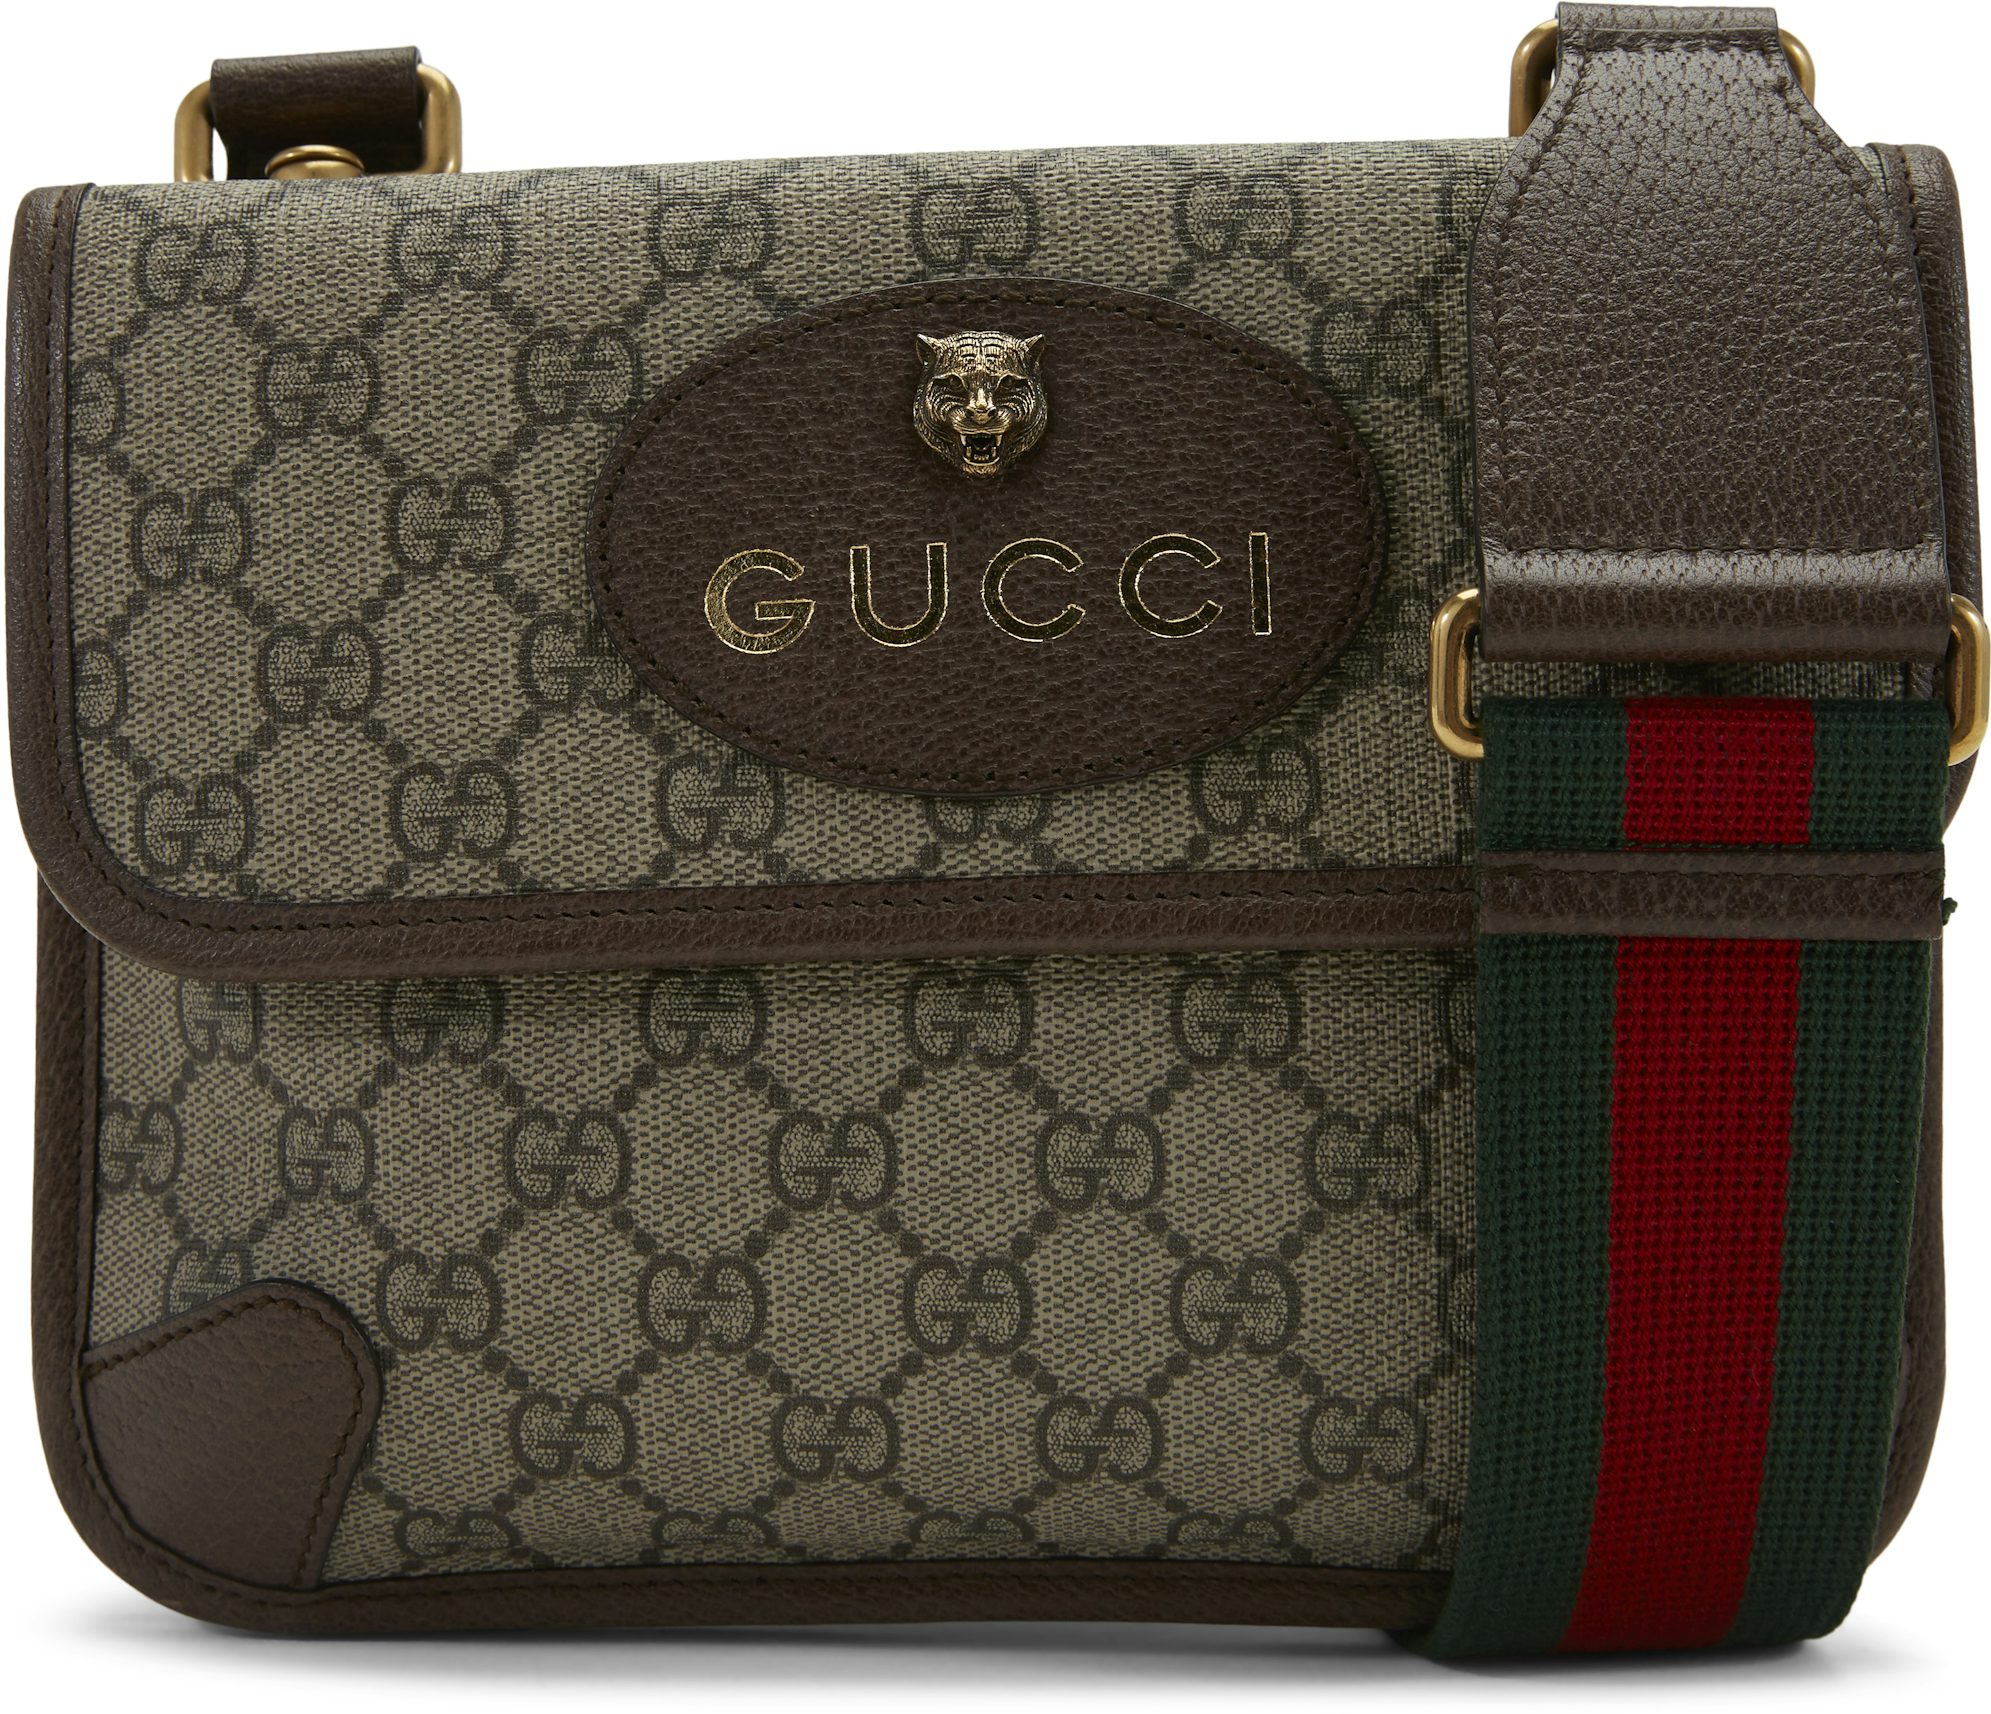 Gucci Bag $600 - $700 luxury vintage bags for sale